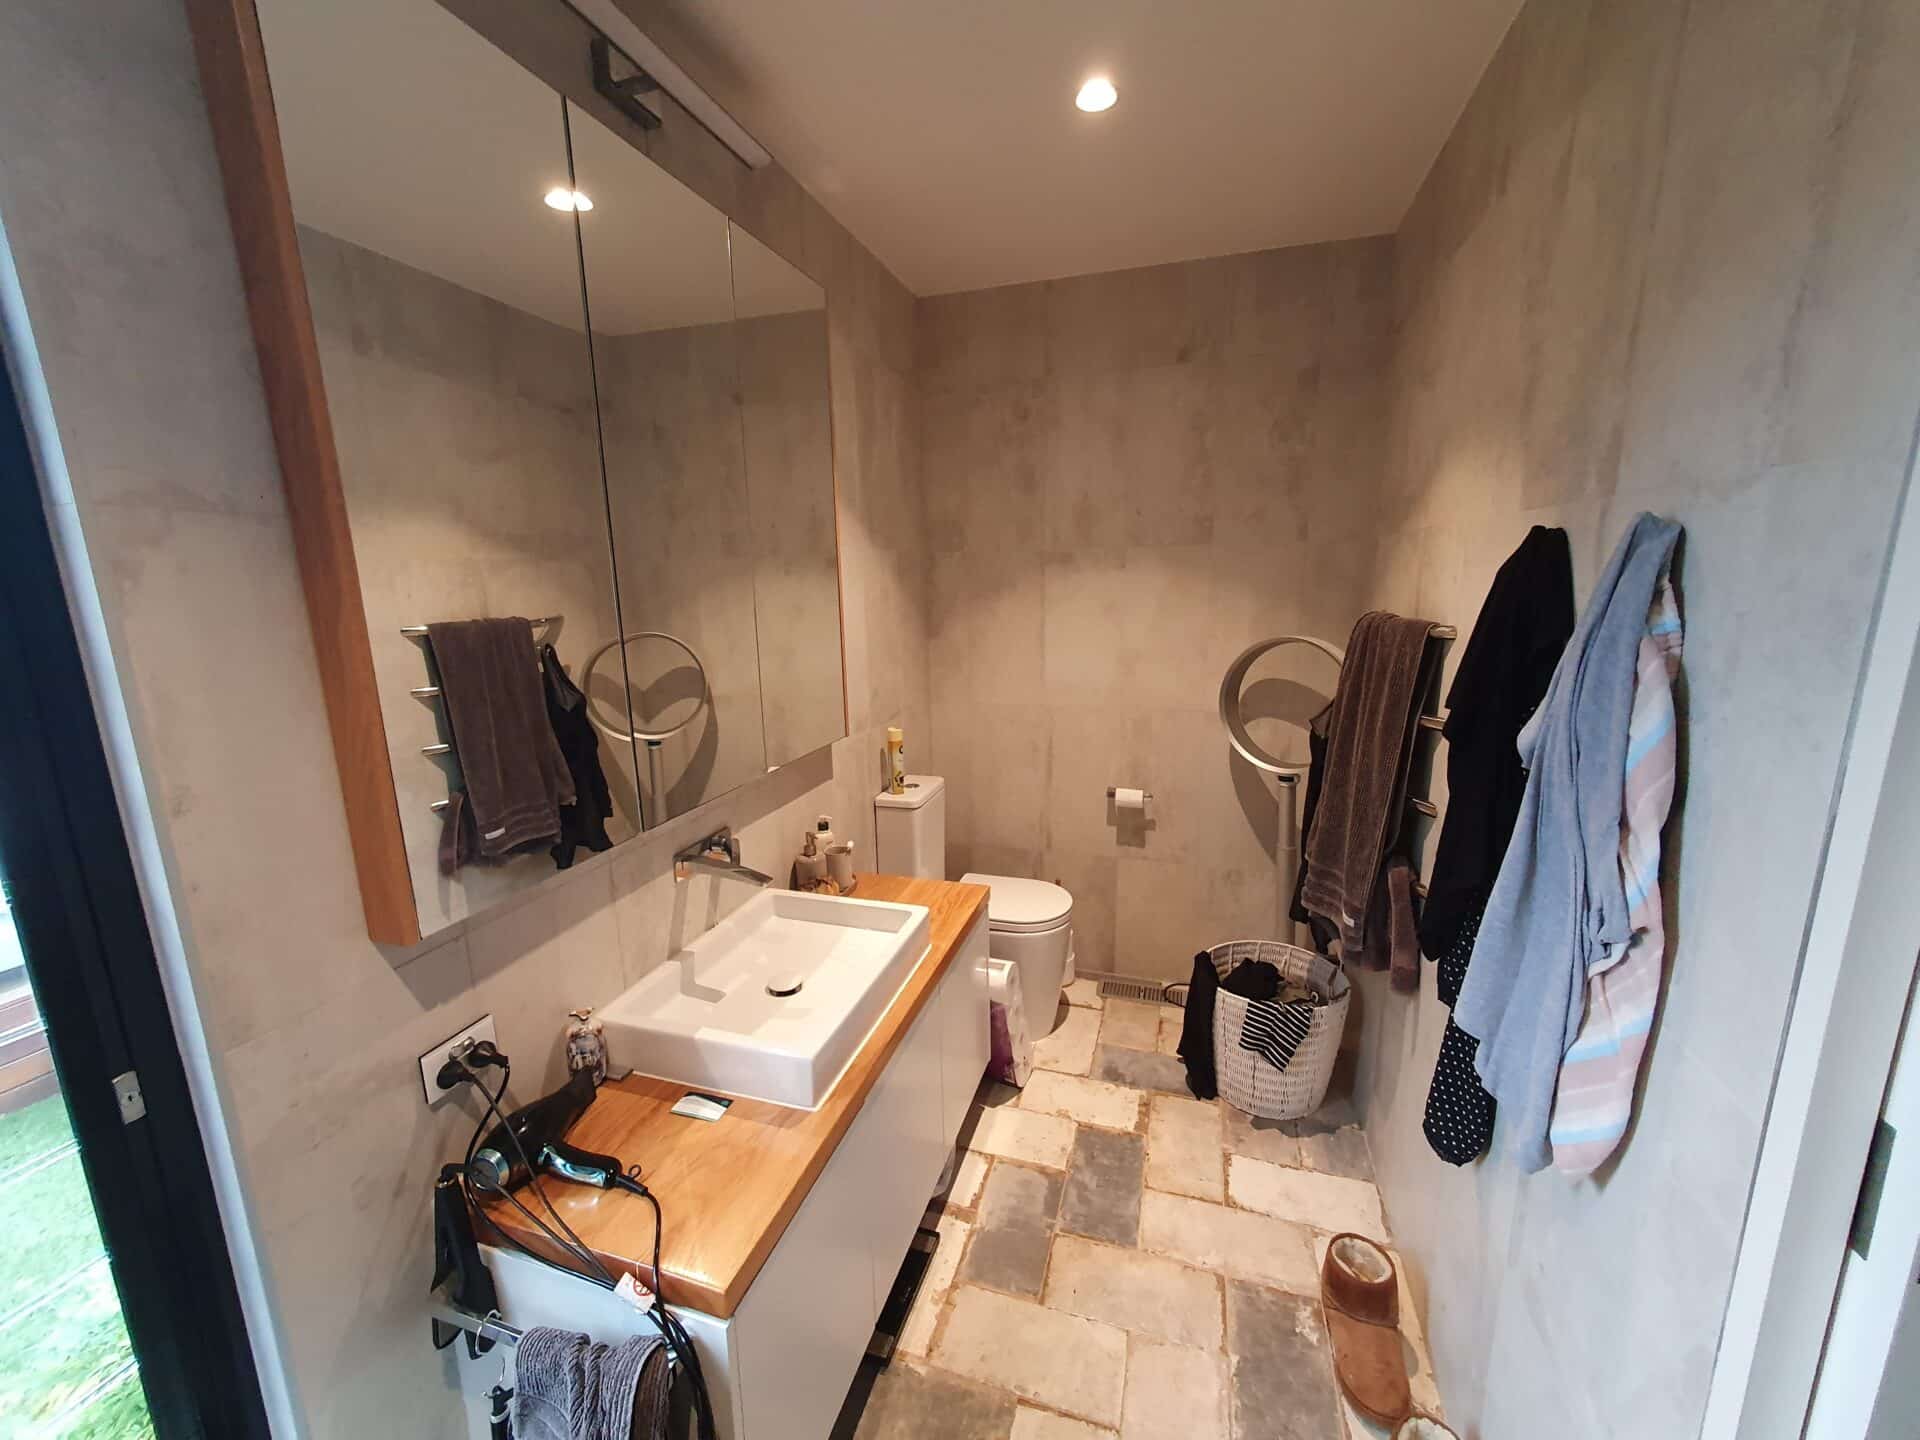 A bathroom with a sink and a mirror, and some clothes hanging.